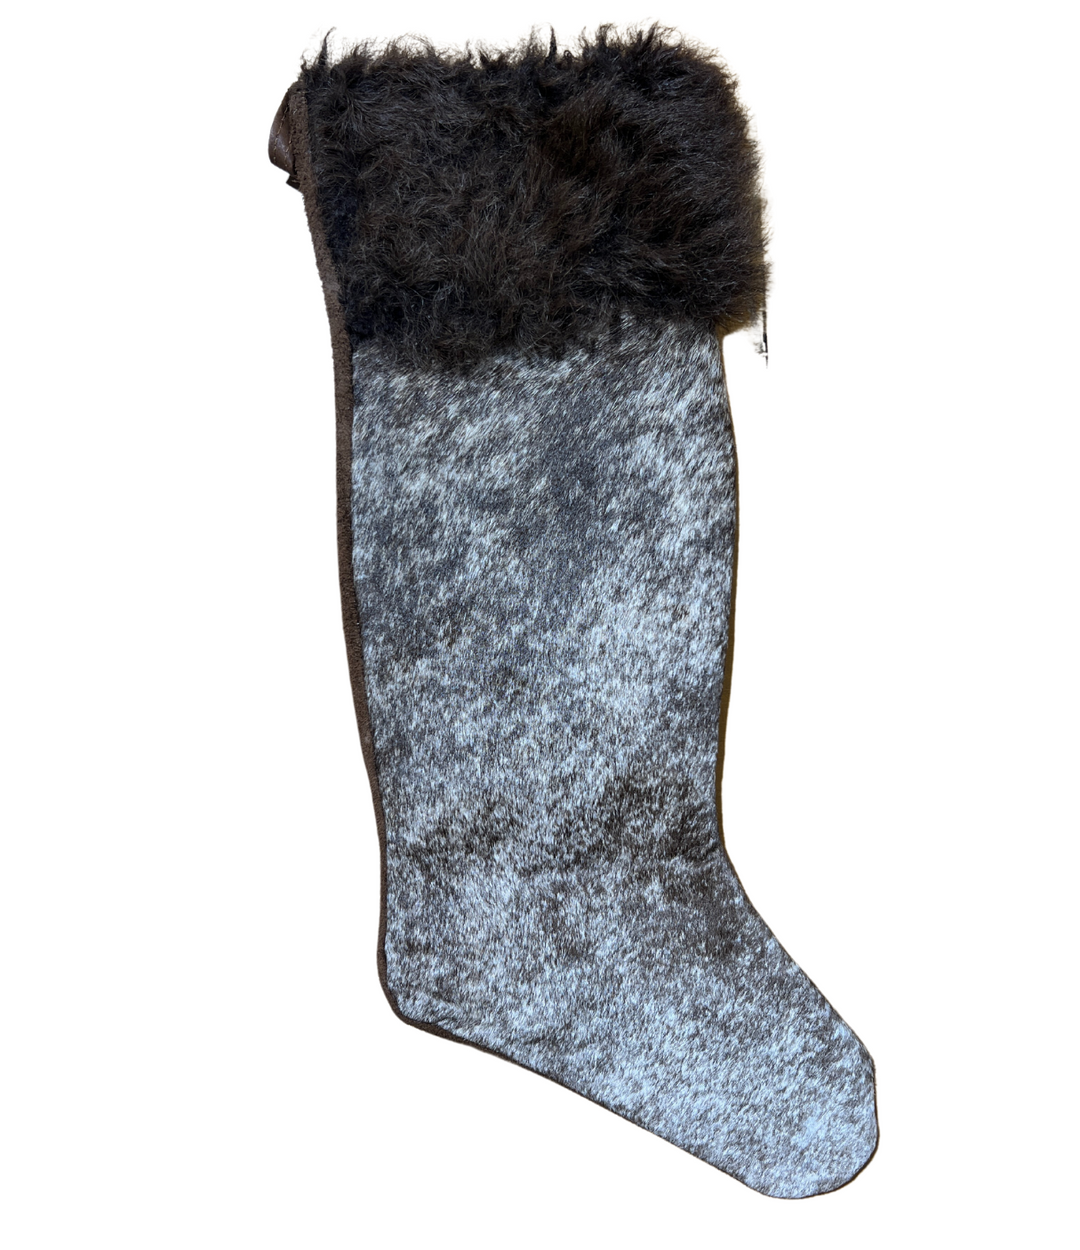 Salt & Pepper - Cowhide Christmas Stocking with Bison Hair - Large